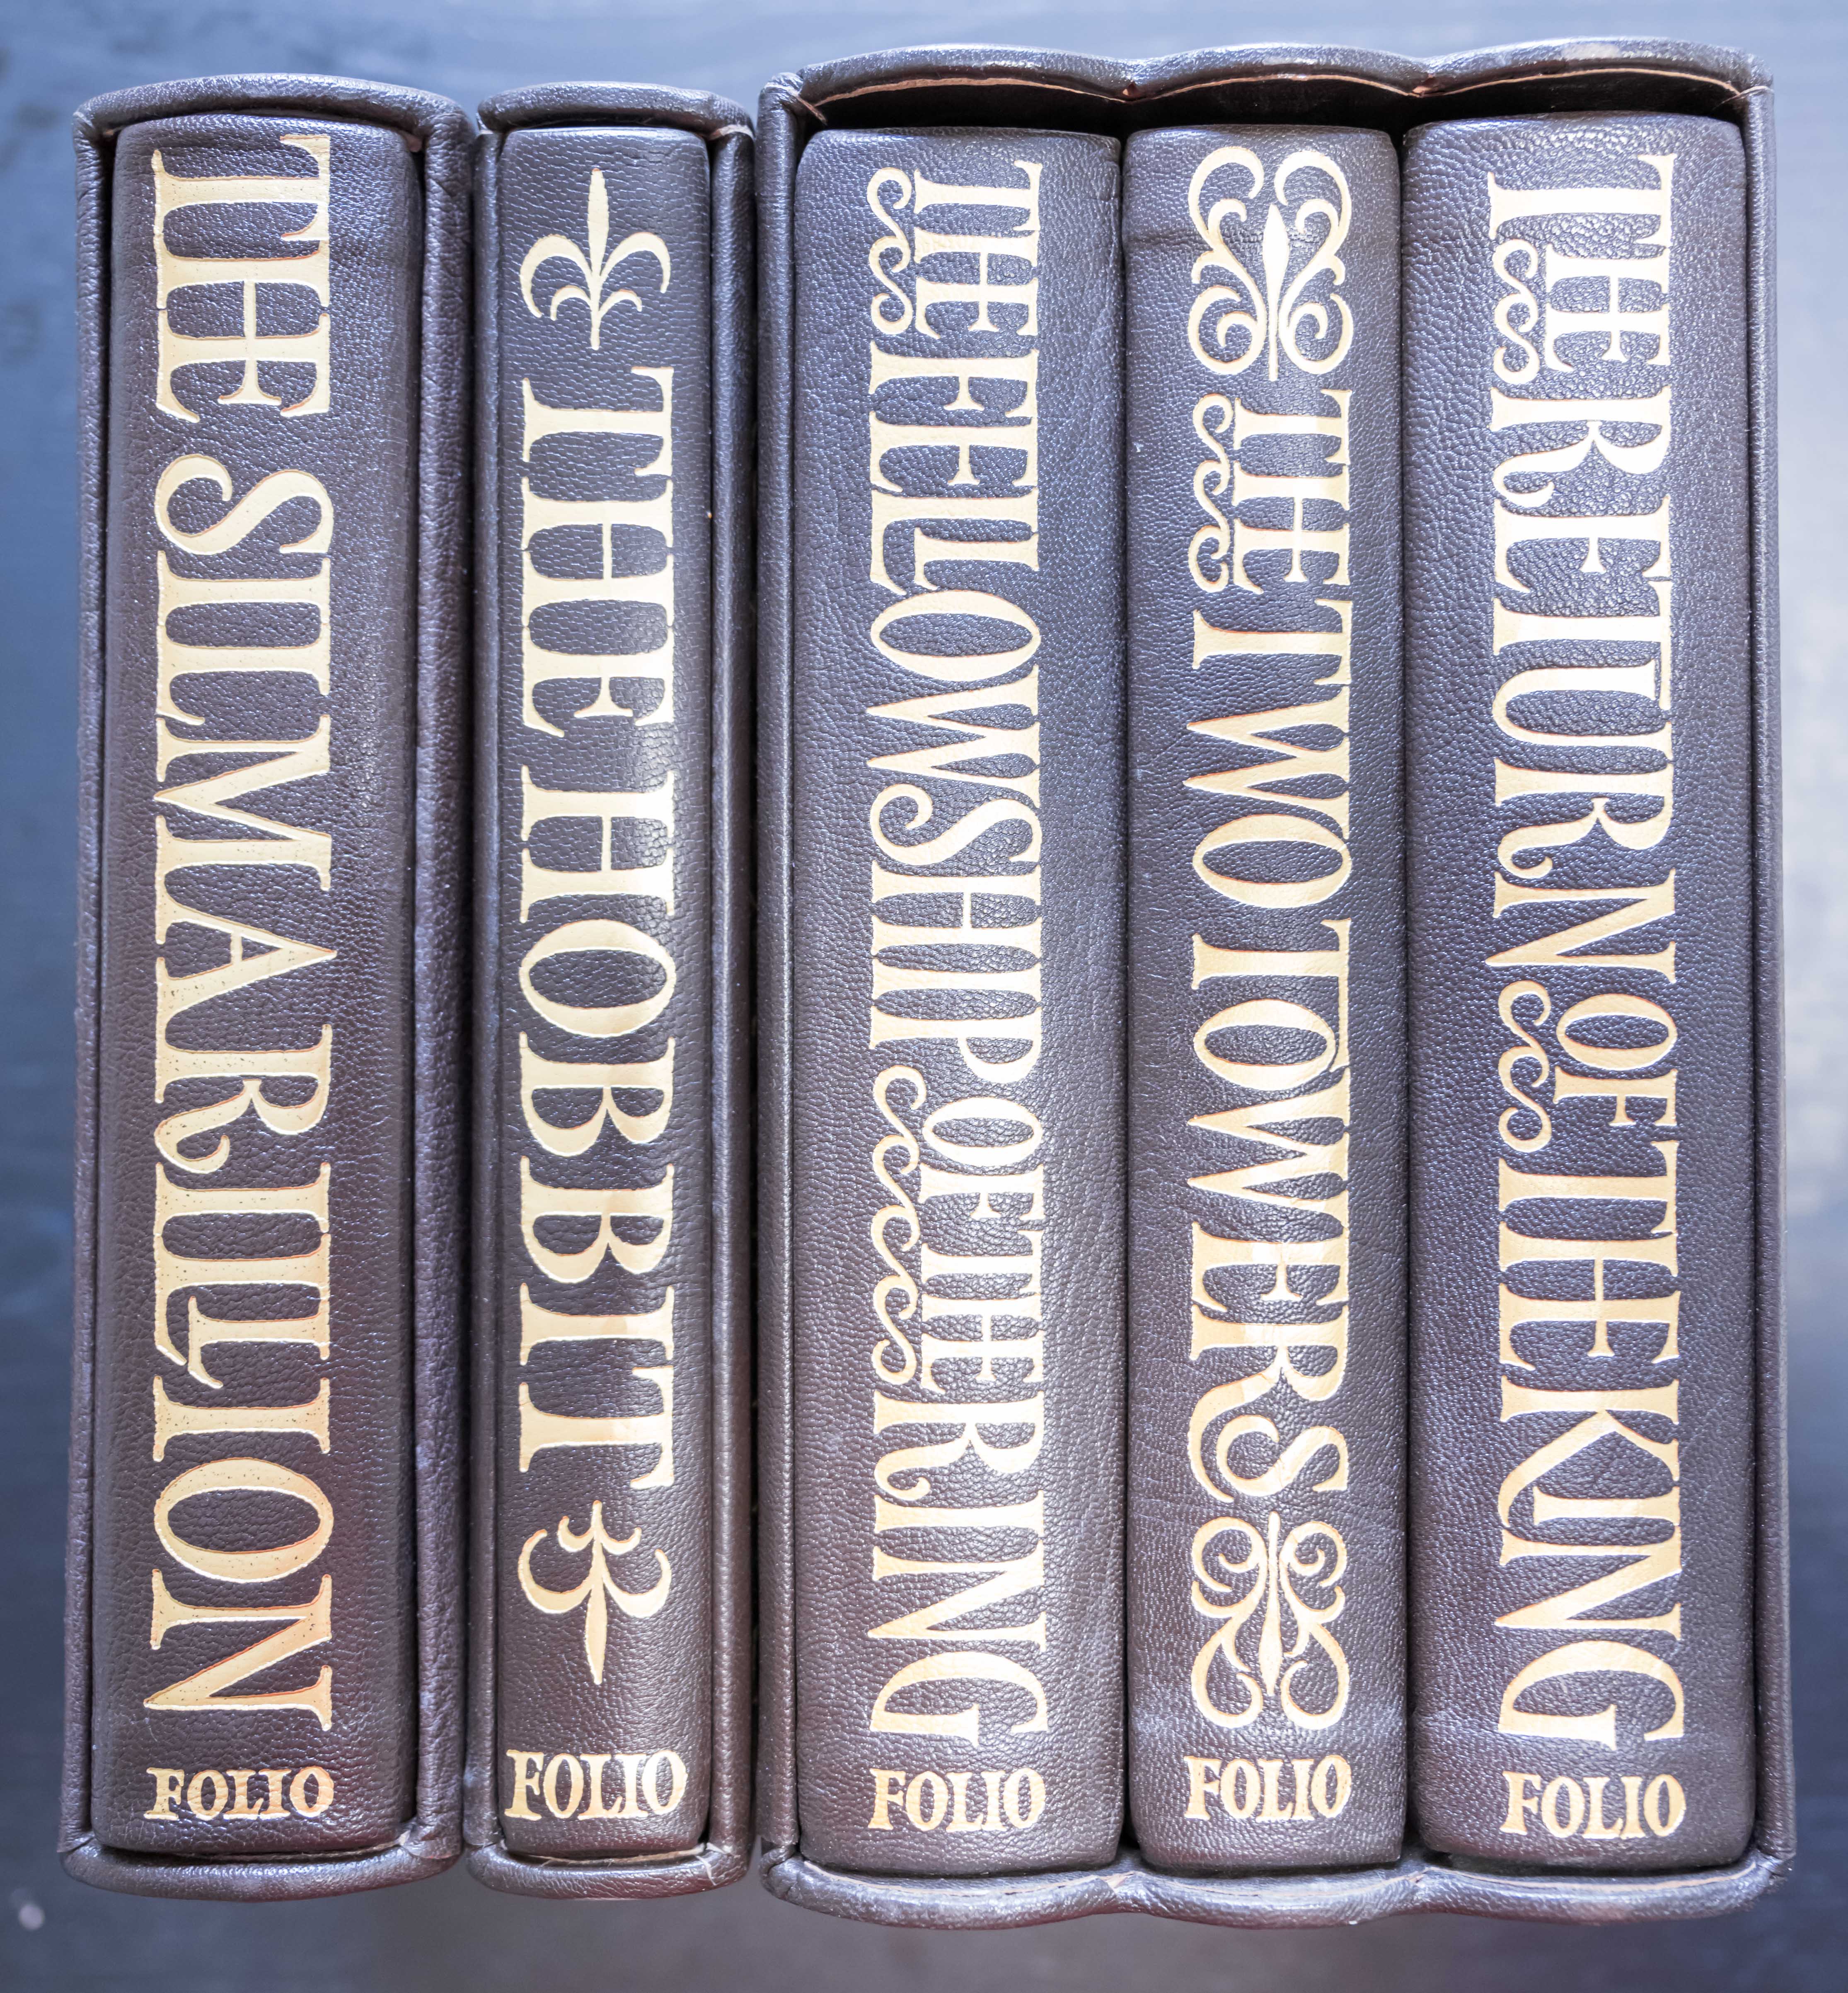 Folio Society Limited Numbered Editions, The Hobbit, The Lord of the Rings and The Silmarillion. All with Limitation Number #989 of 1750 1